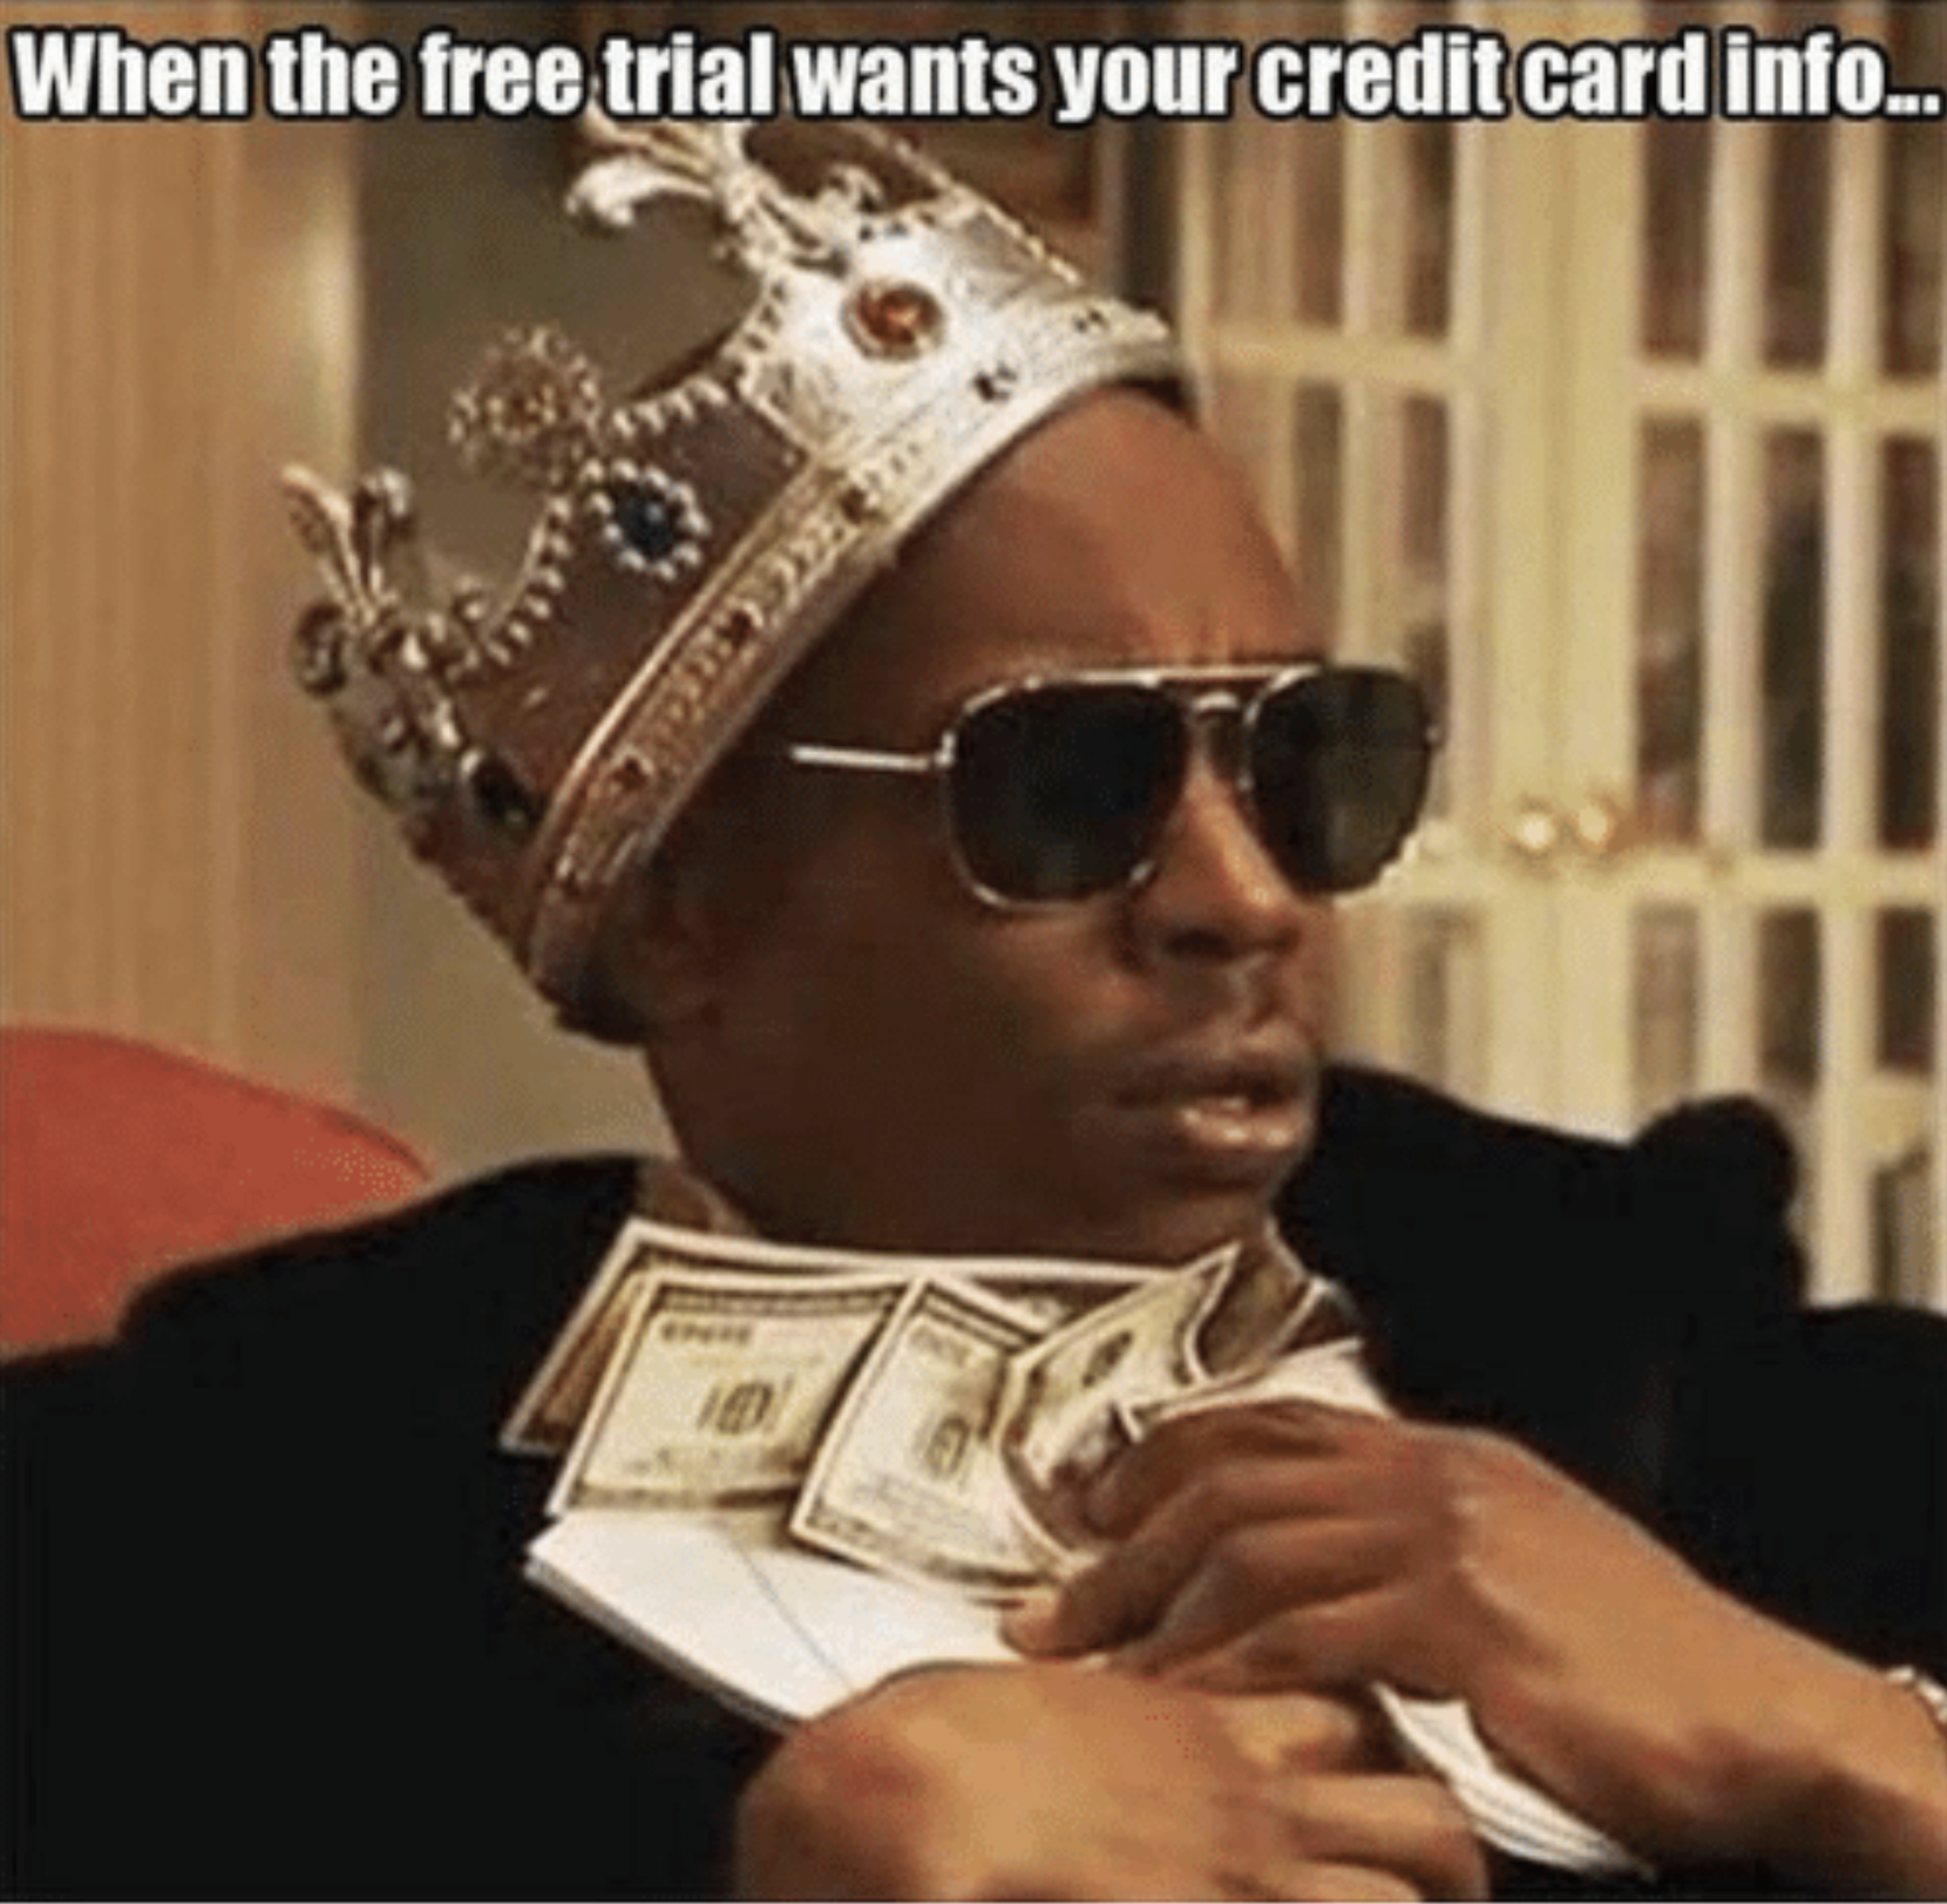 An image that says when the free trial wants your credit card info